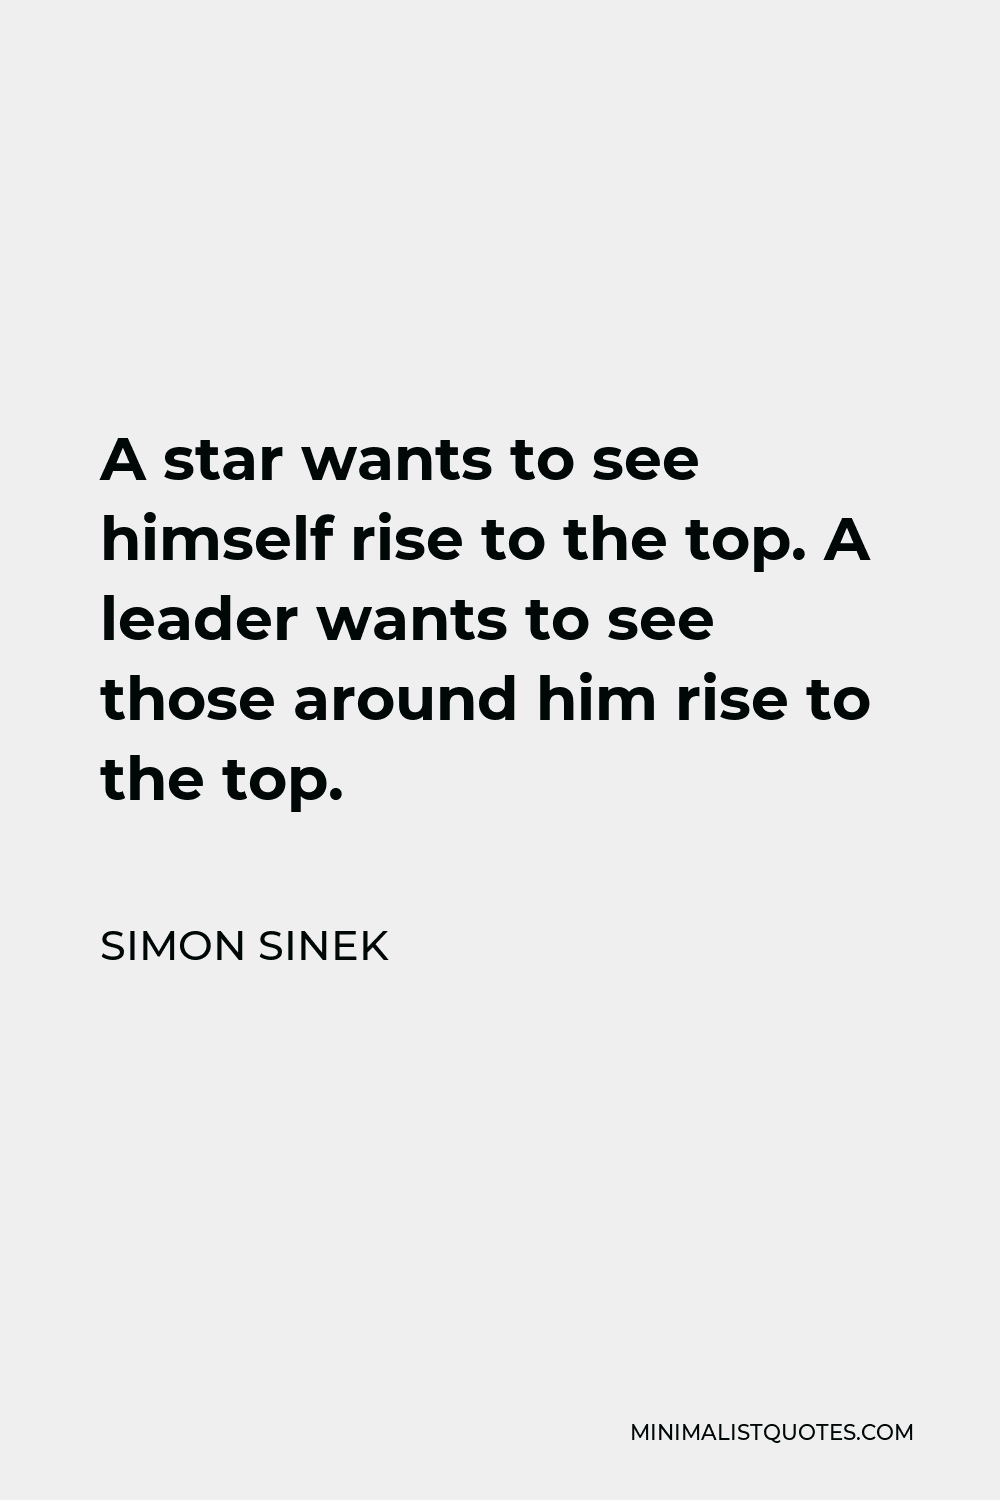 Simon Sinek Quote - A star wants to see himself rise to the top. A leader wants to see those around him rise to the top.